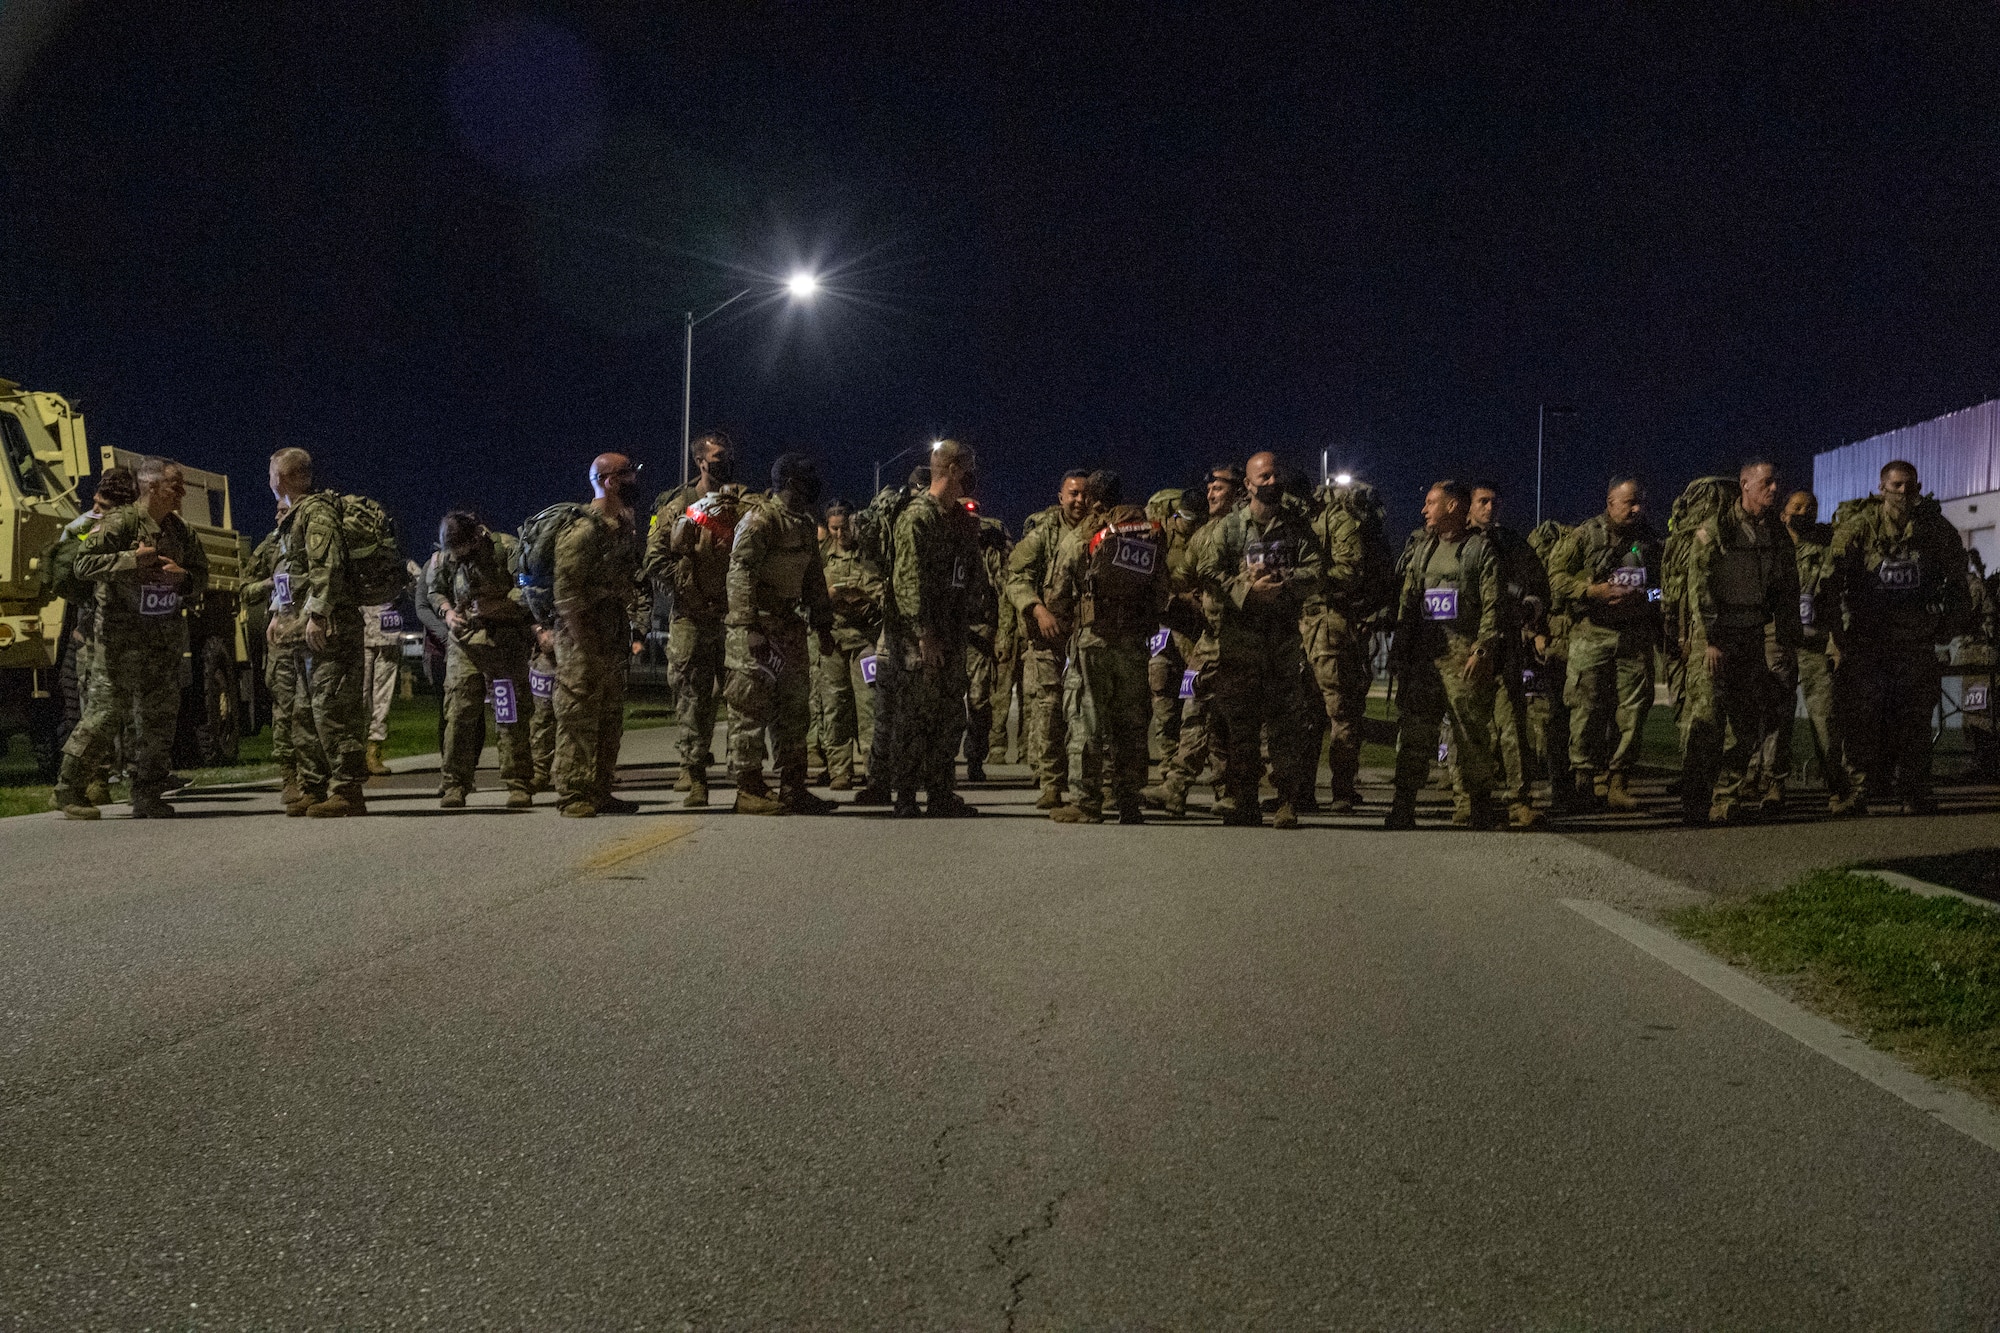 Members of the Joint Communications Support Element prepare to start a Norwegian Foot March on April 2, 2021, at MacDill Air Force Base, Fla.